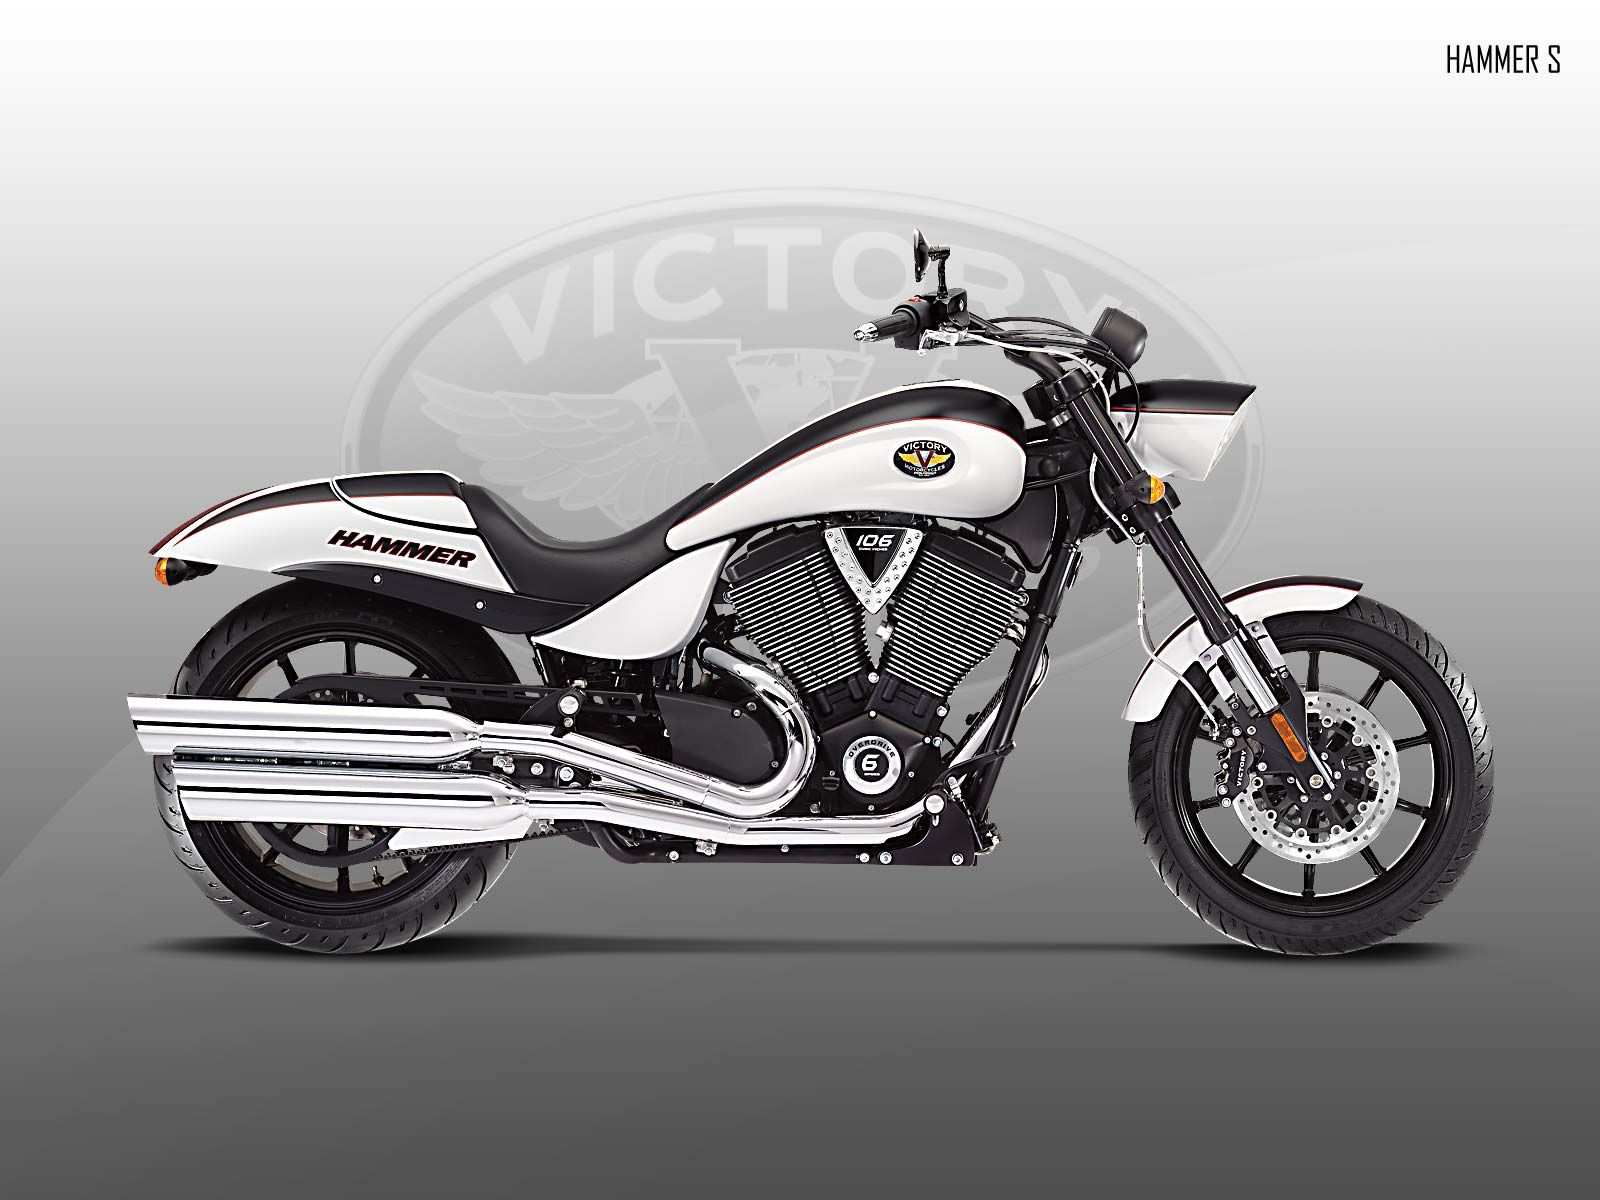  2010 Victory Hammer S